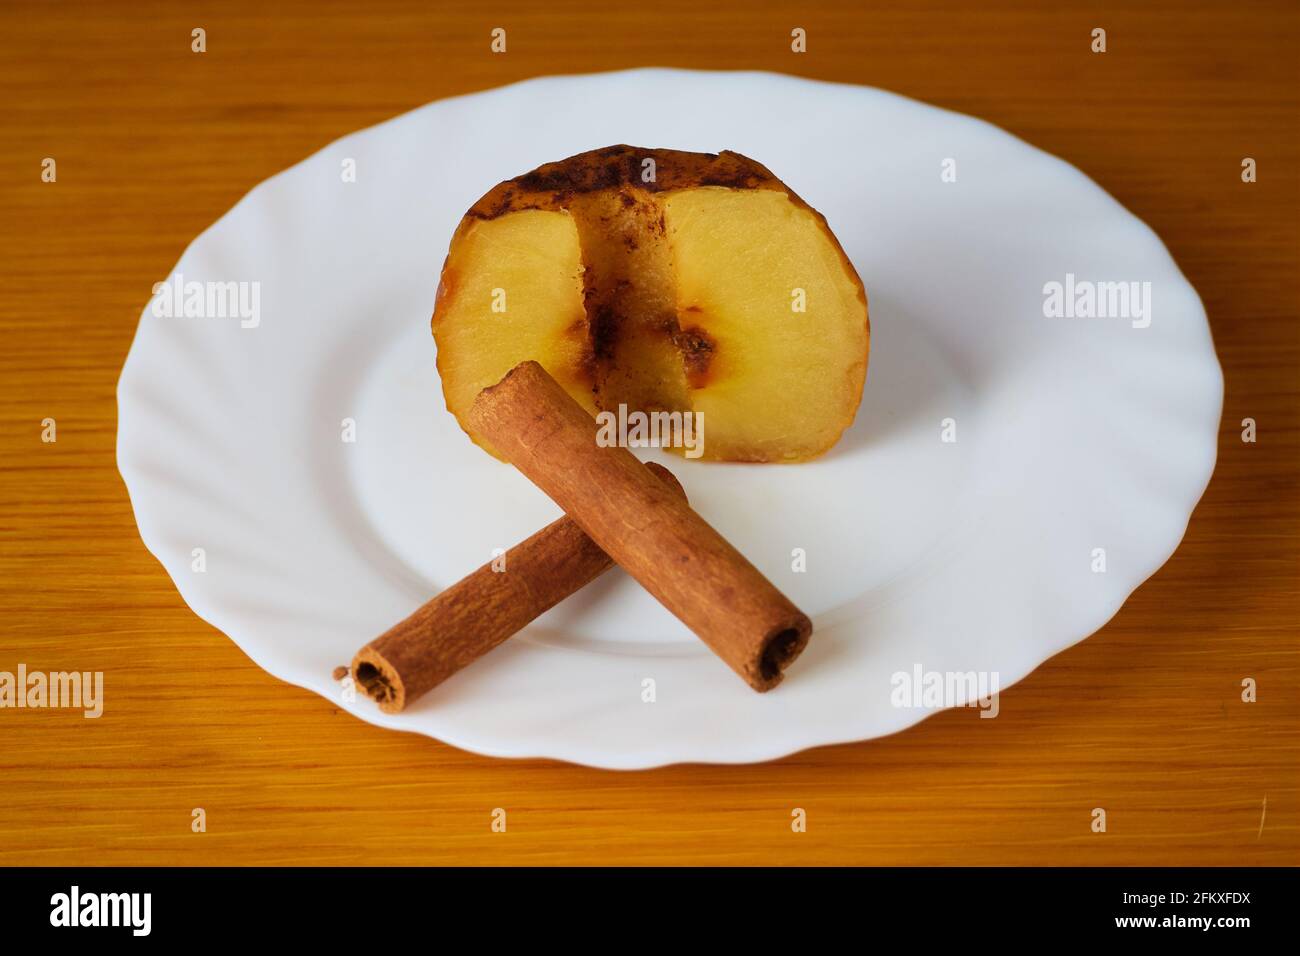 Half of Baked Apple decorated with cinnamon sticks on a plate and wooden background Stock Photo